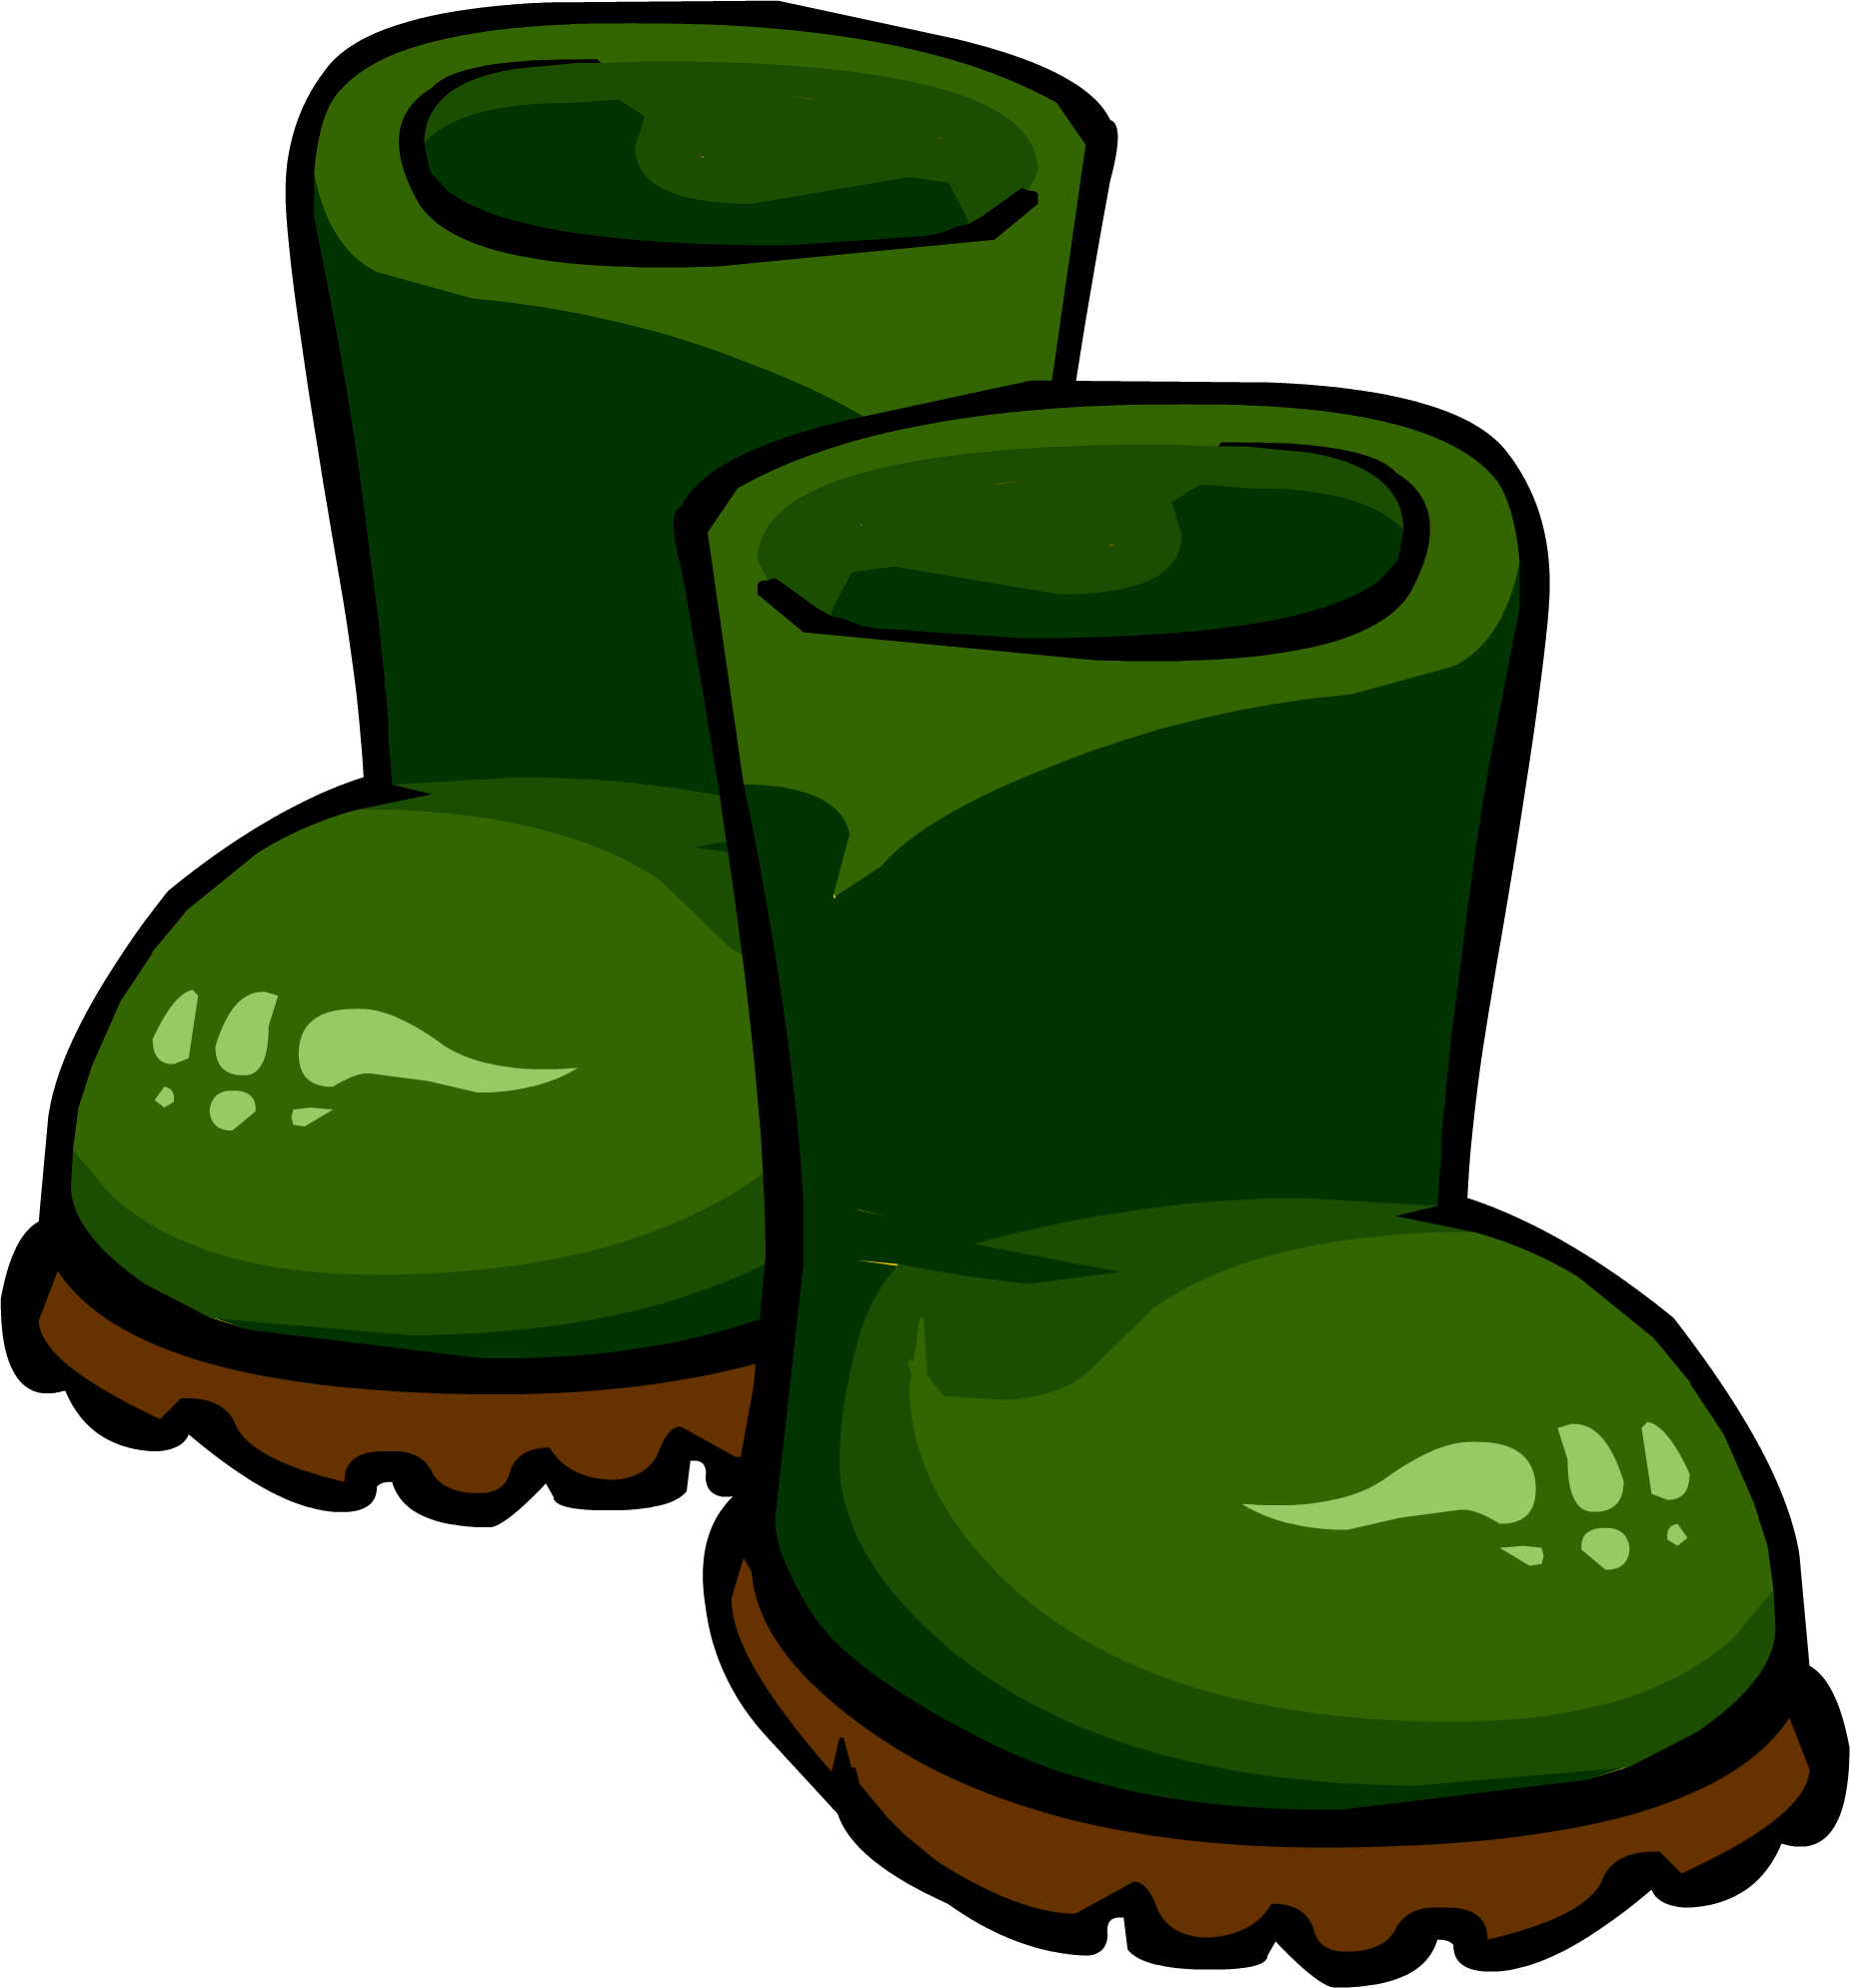 Green Rubber Boots - Club Penguin Green Boots (1851x1989)